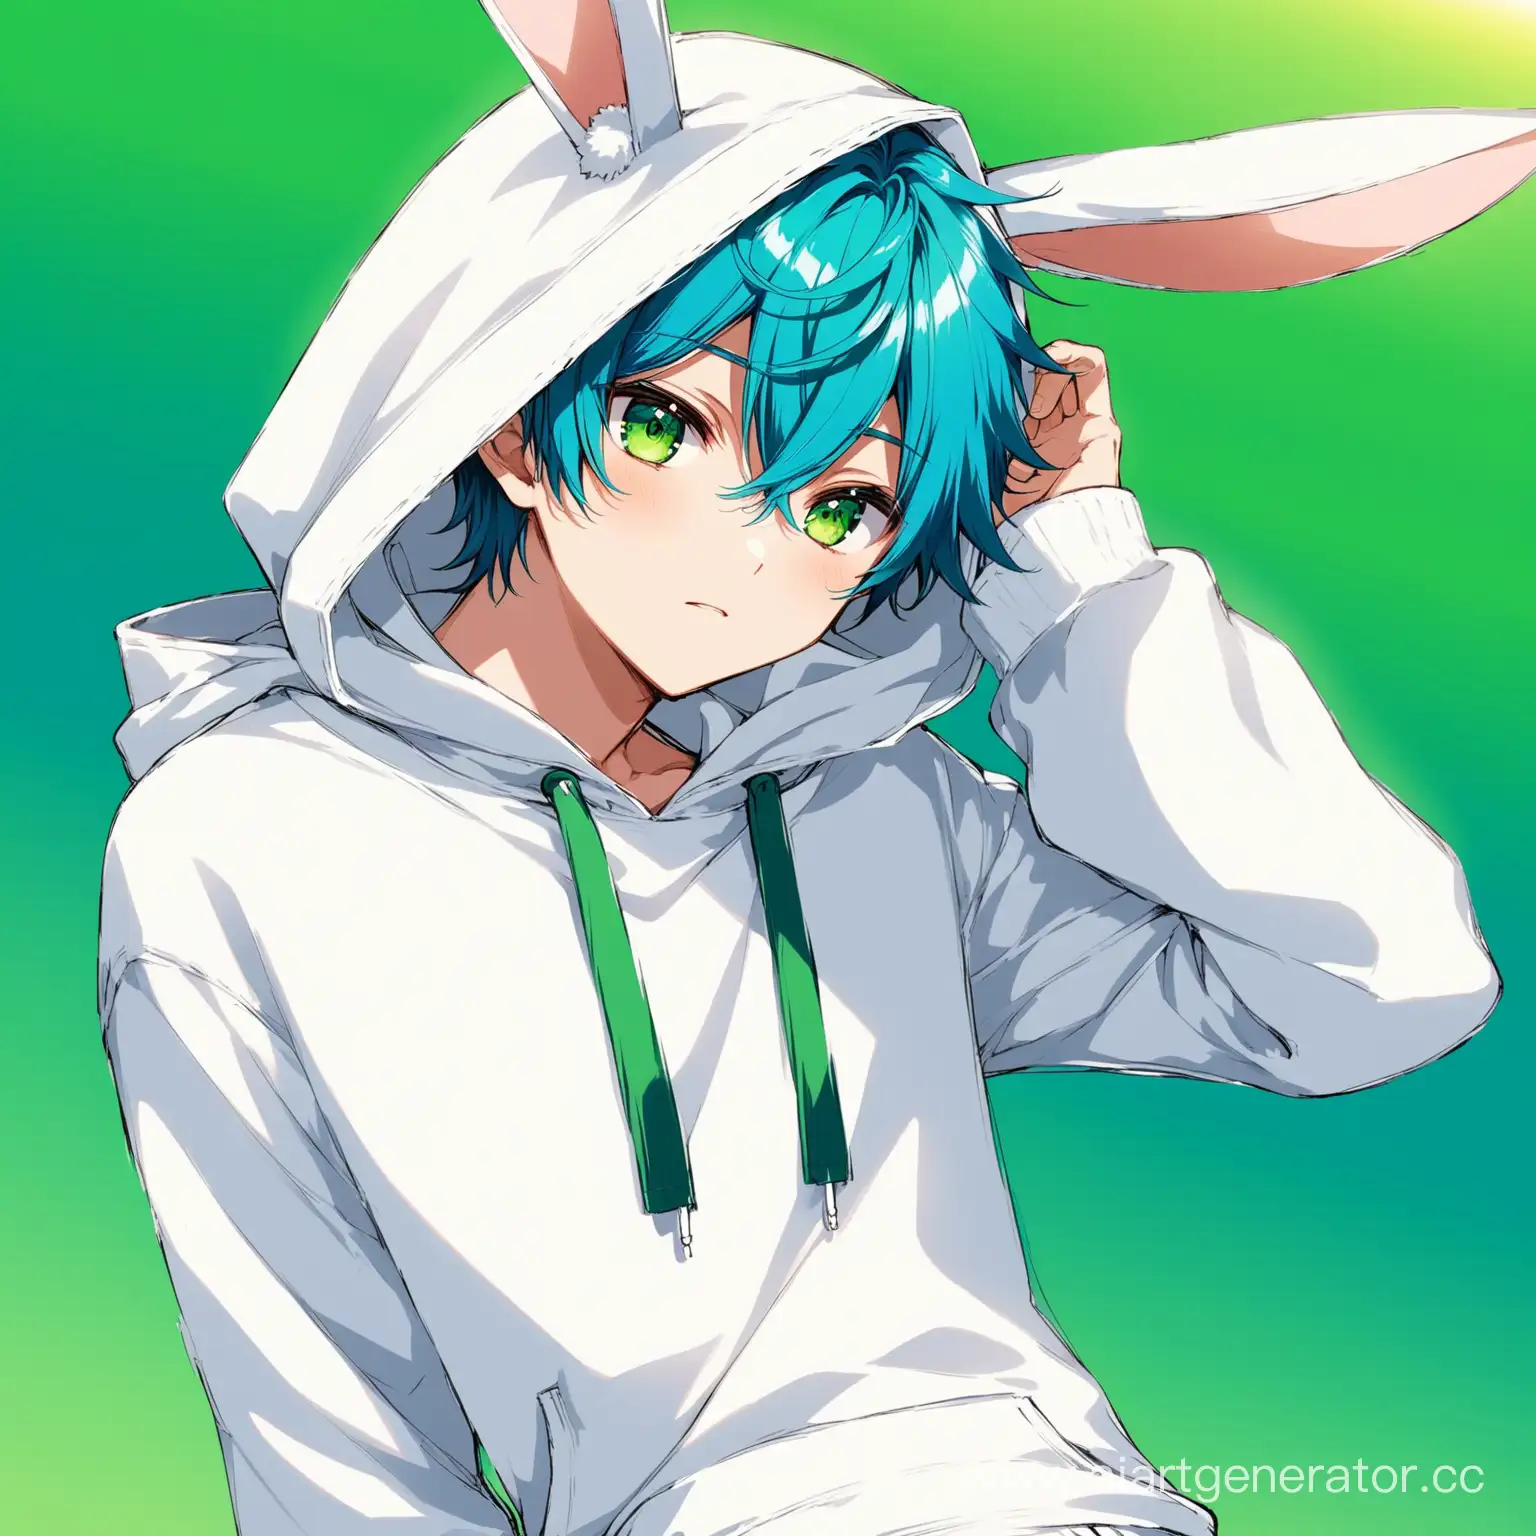 Anime-Boy-with-Blue-Hair-and-Green-Eyes-Wearing-White-Hoodie-and-Rabbit-Hood